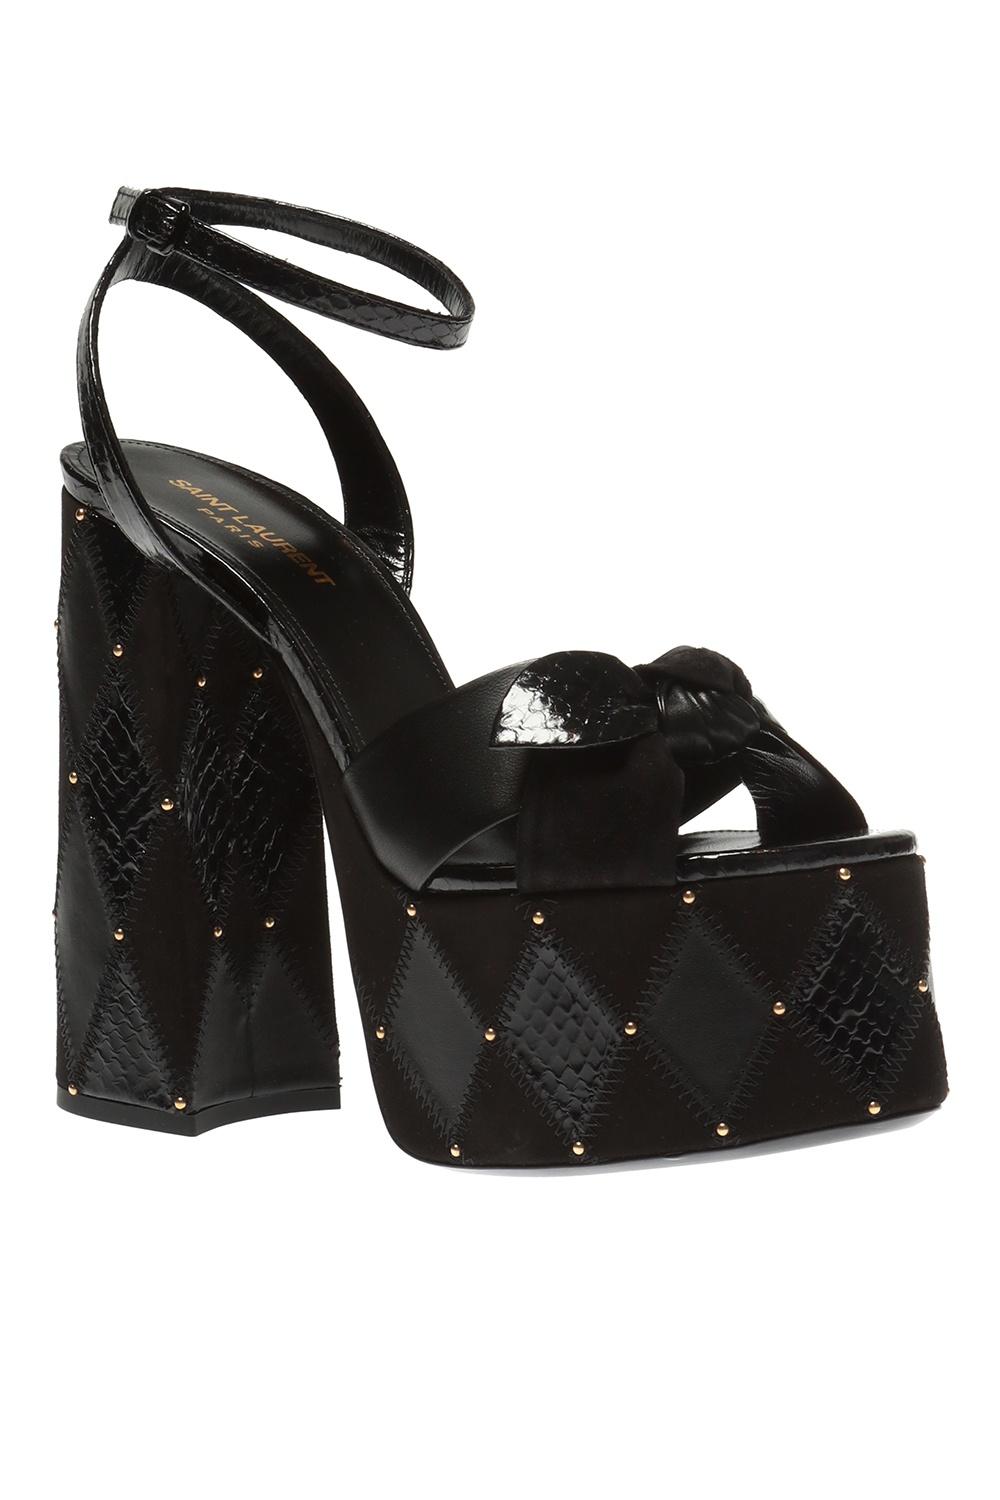 Saint Laurent SS19 Runway Black Leather Suede Paige 85 Platform Sandals

Black ‘Paige’ platform sandals from Saint Laurent. Made of leather. Fastened with a buckle strap. Decorated with an applique in the form of a bow. Heel and platform featuring